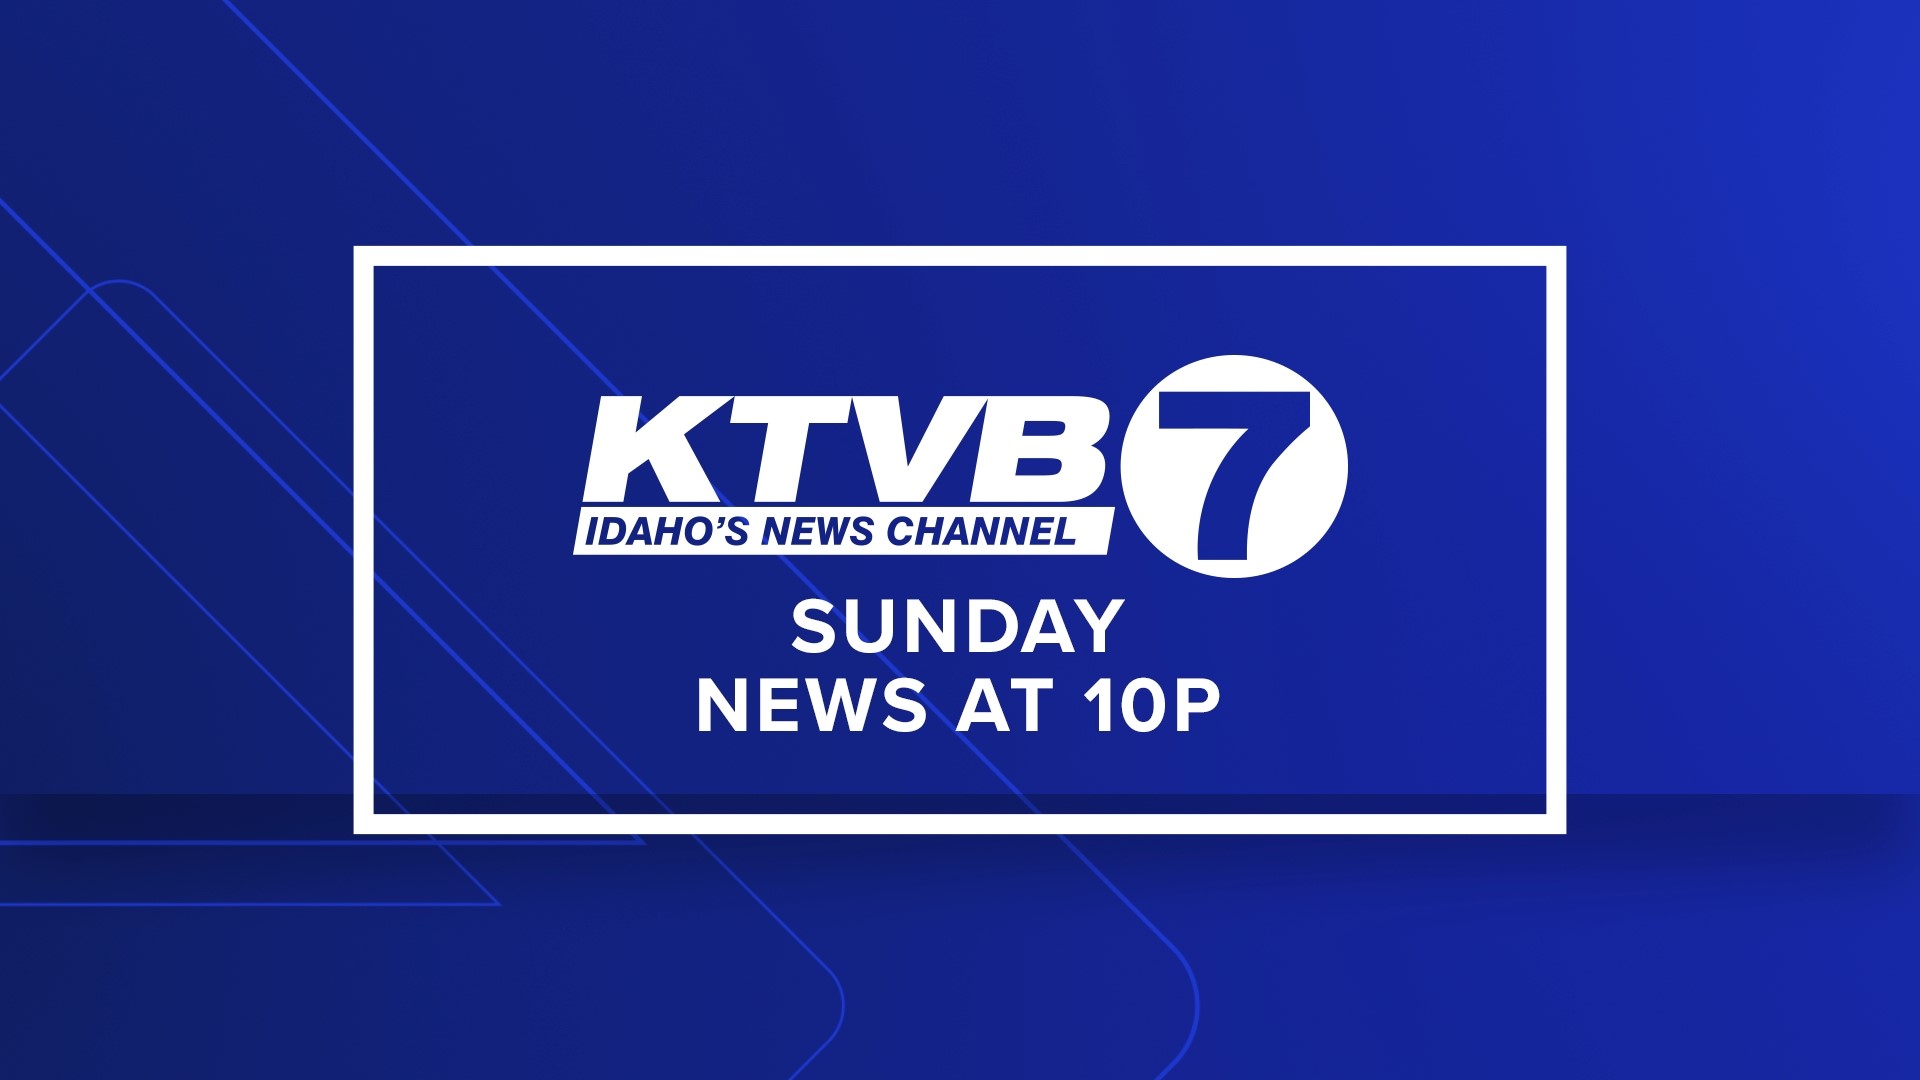 End your day with First Alert Weather from a certified local meteorologist and the day’s most important local, regional, national news from Idaho's #1 news.